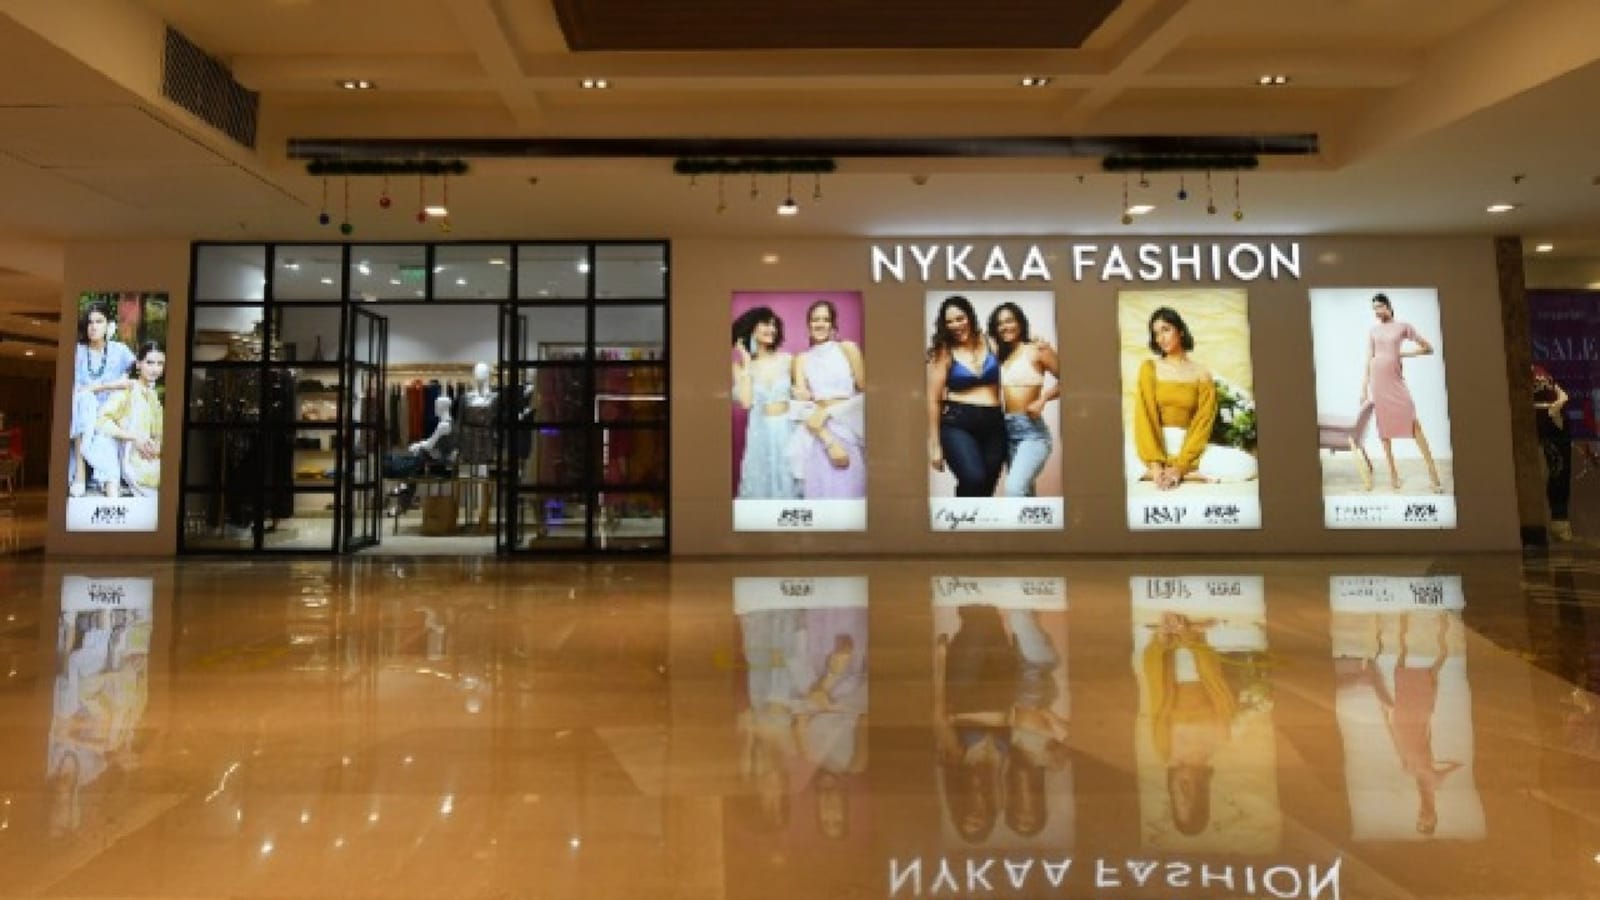 Nykaa Fashion expands activewear portfolio by acquiring Kica - MediaBrief